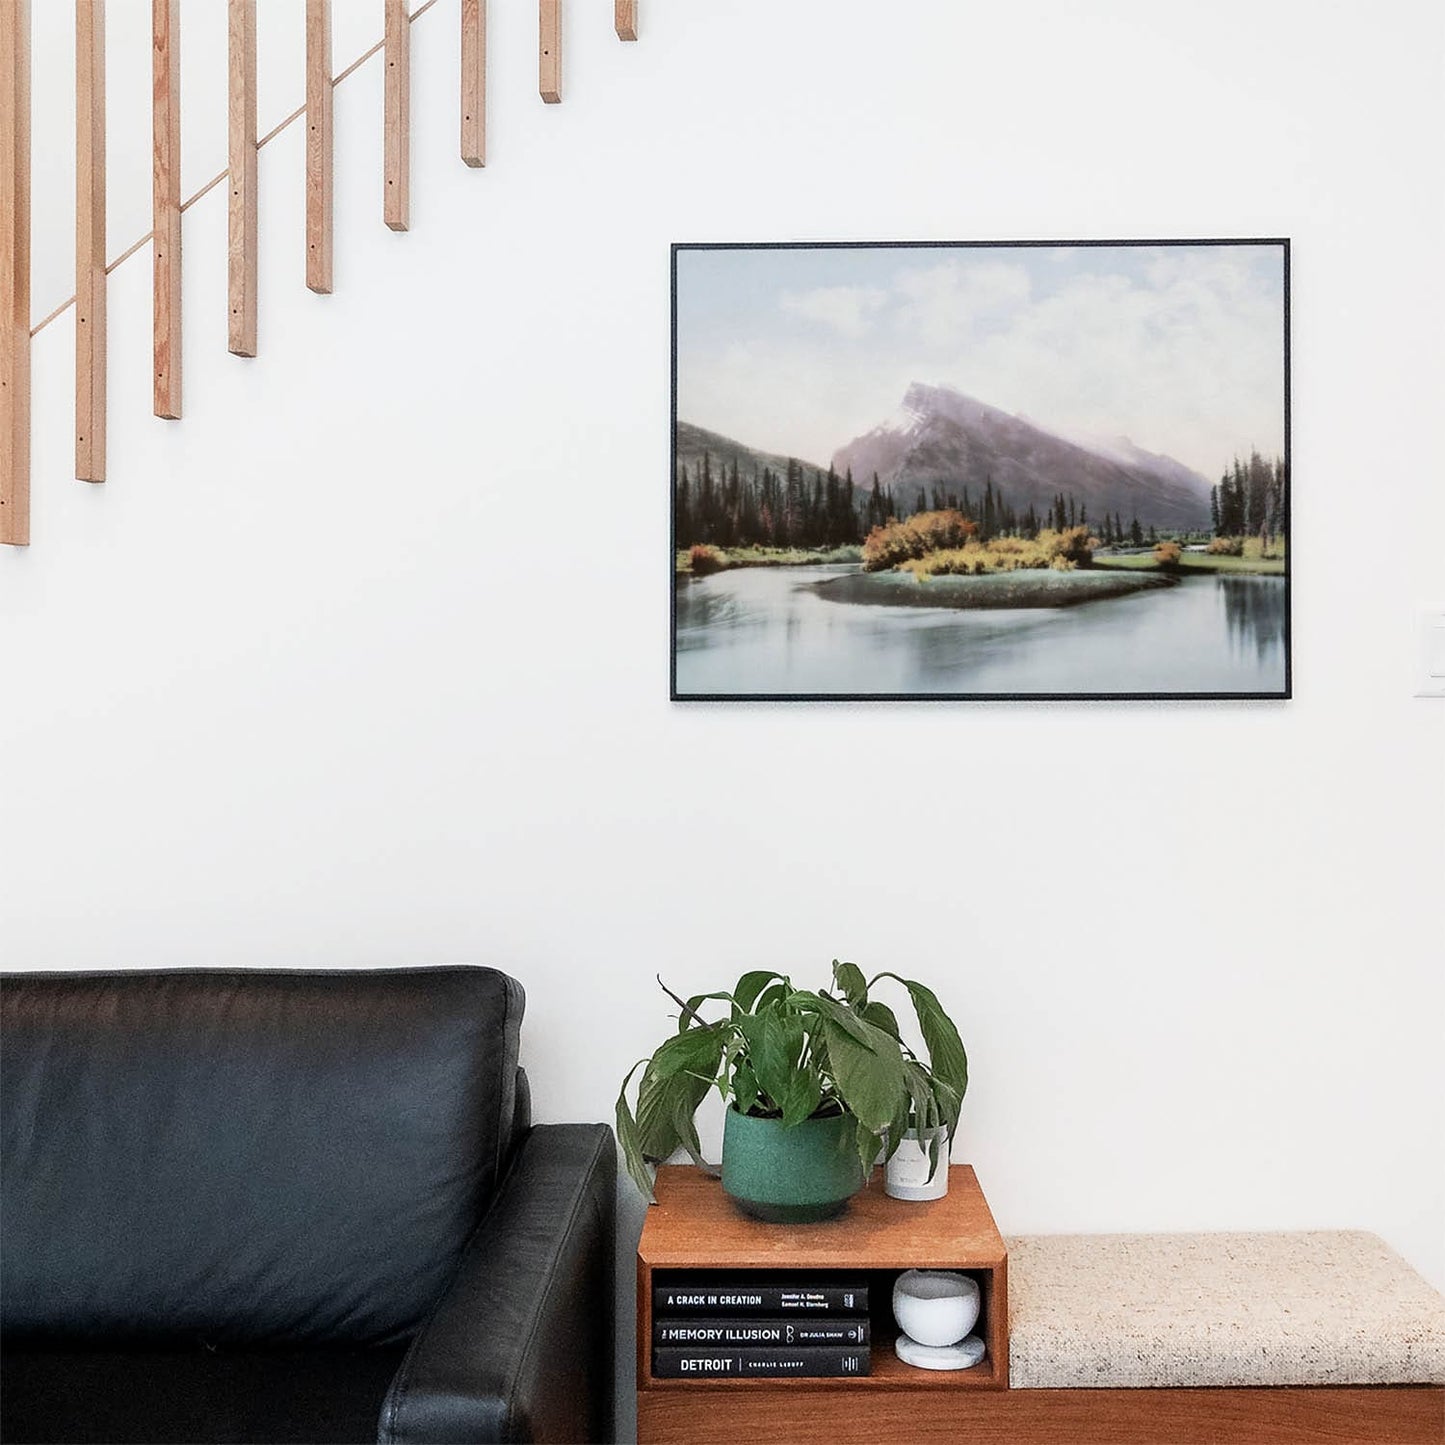 Living space with a black leather couch and table with a plant and books below a staircase featuring a framed picture of Mountain and Lake